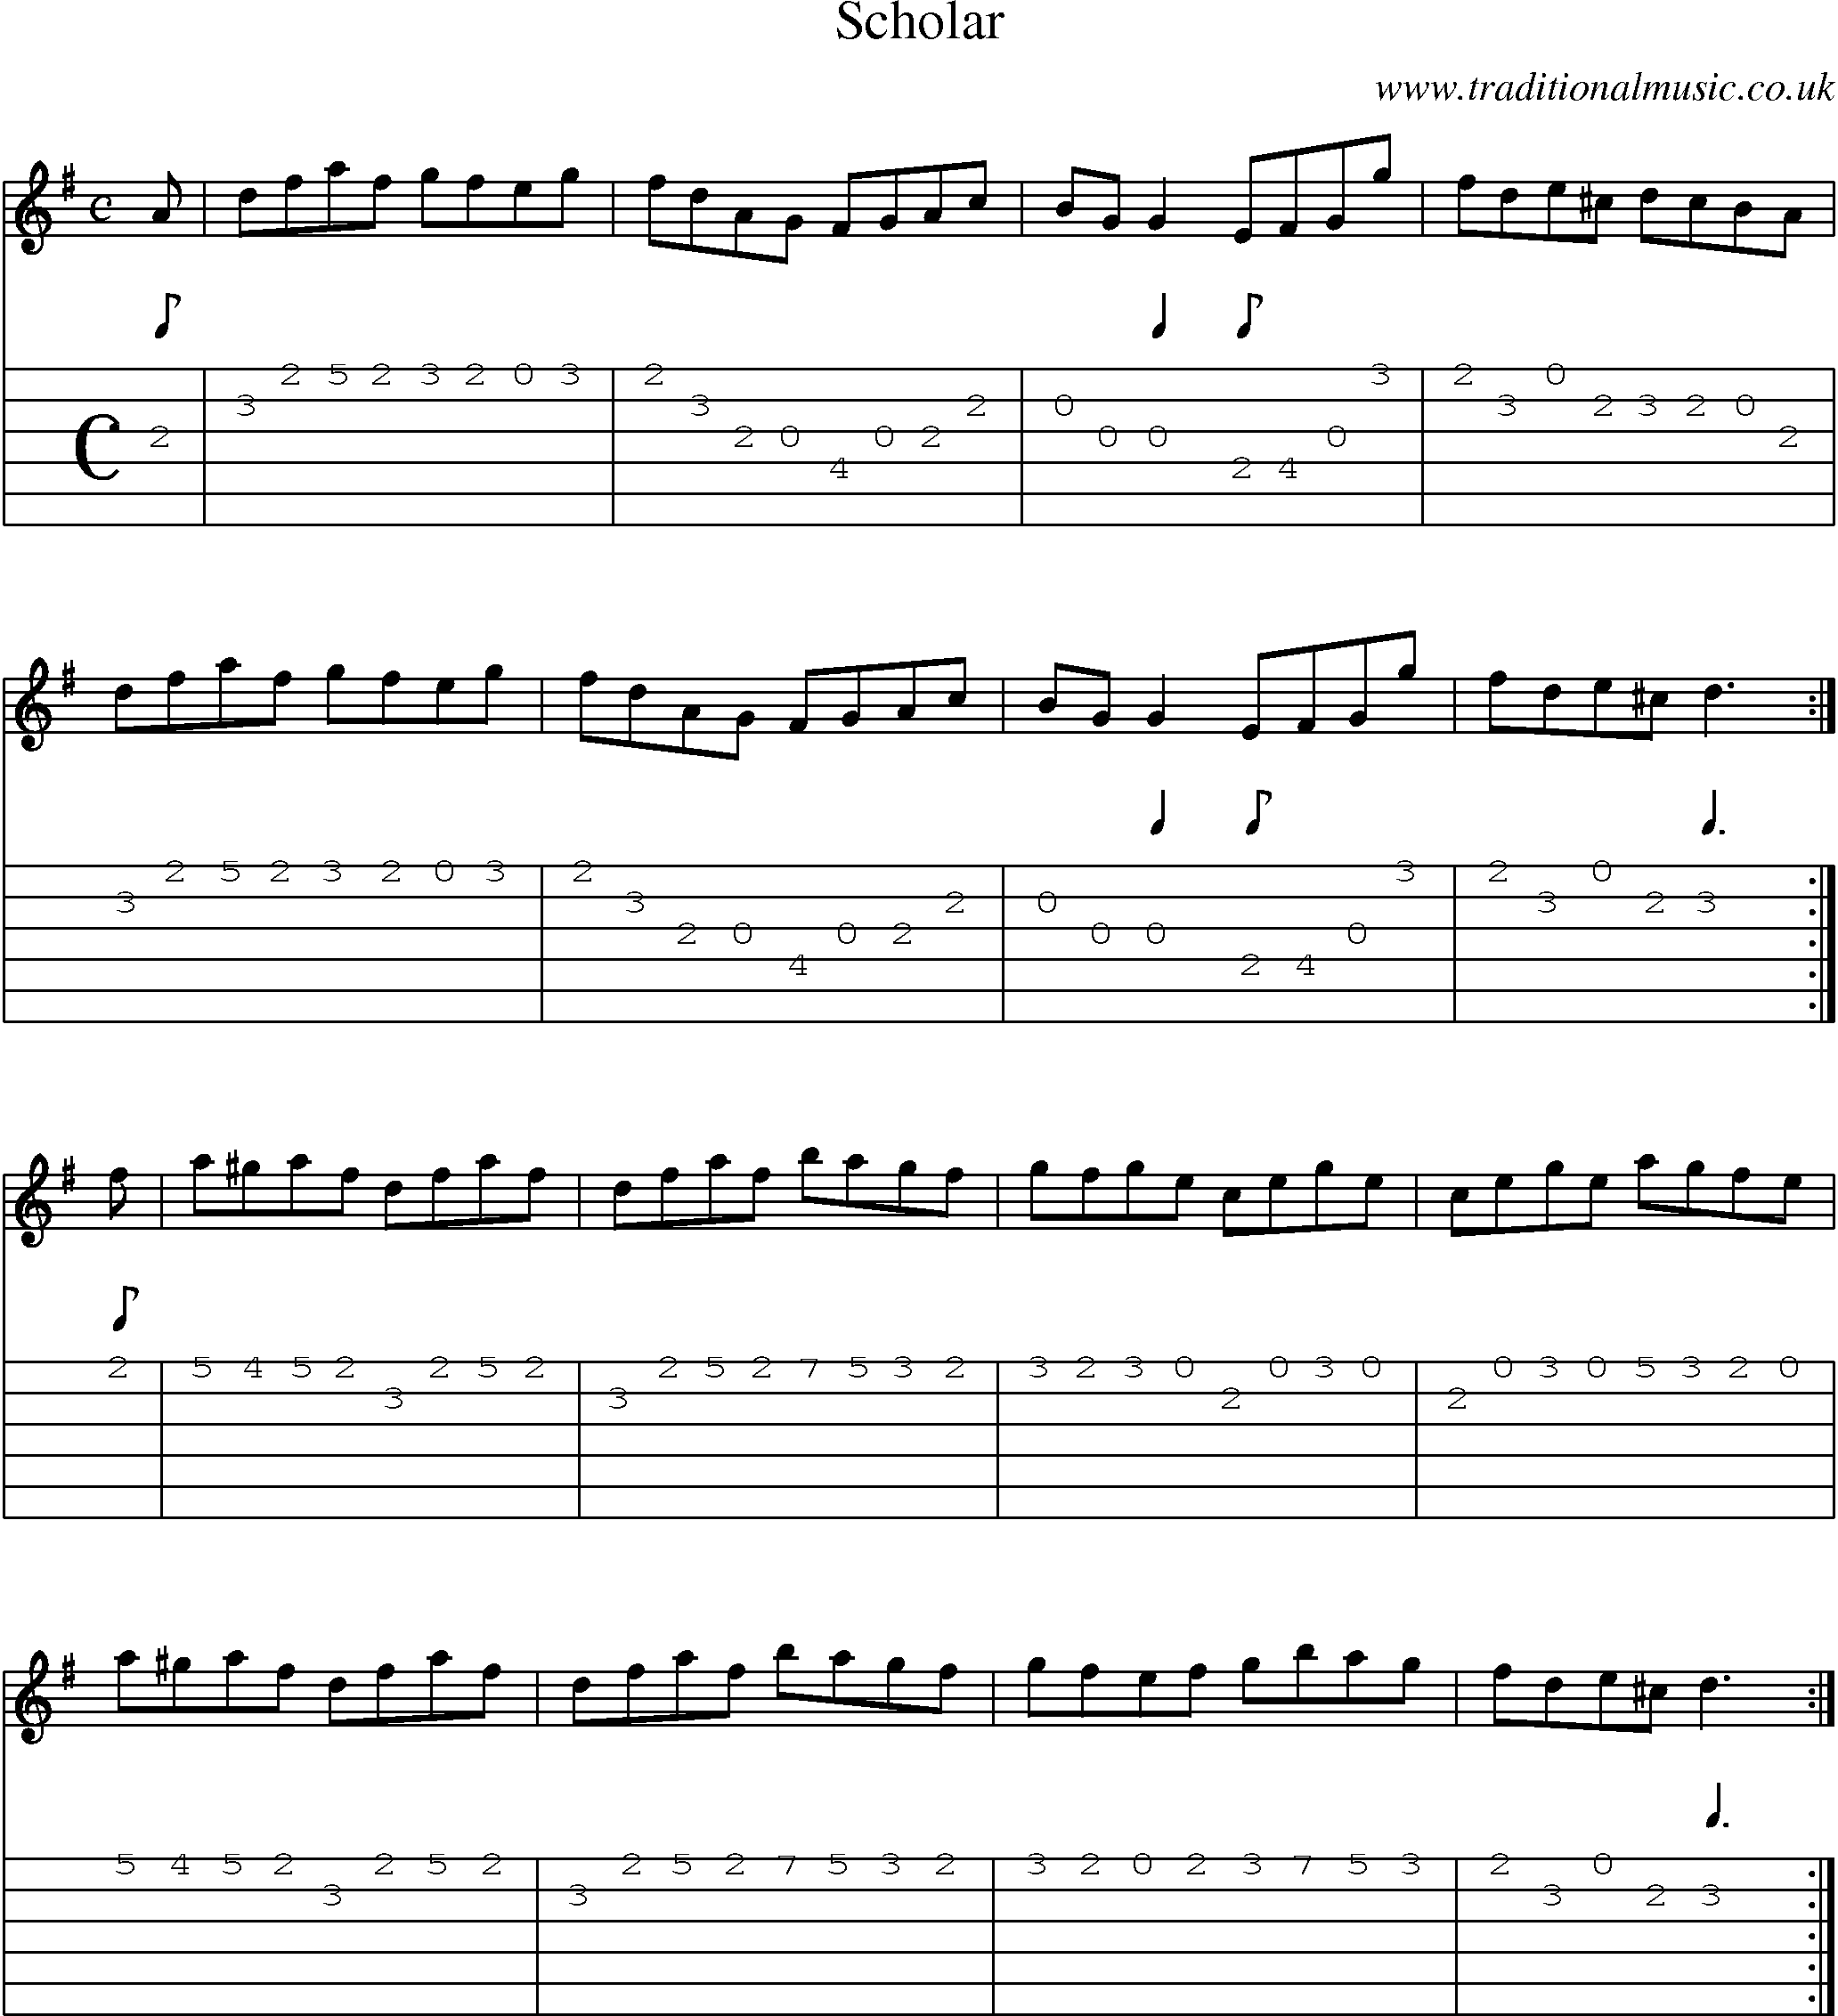 Music Score and Guitar Tabs for Scholar